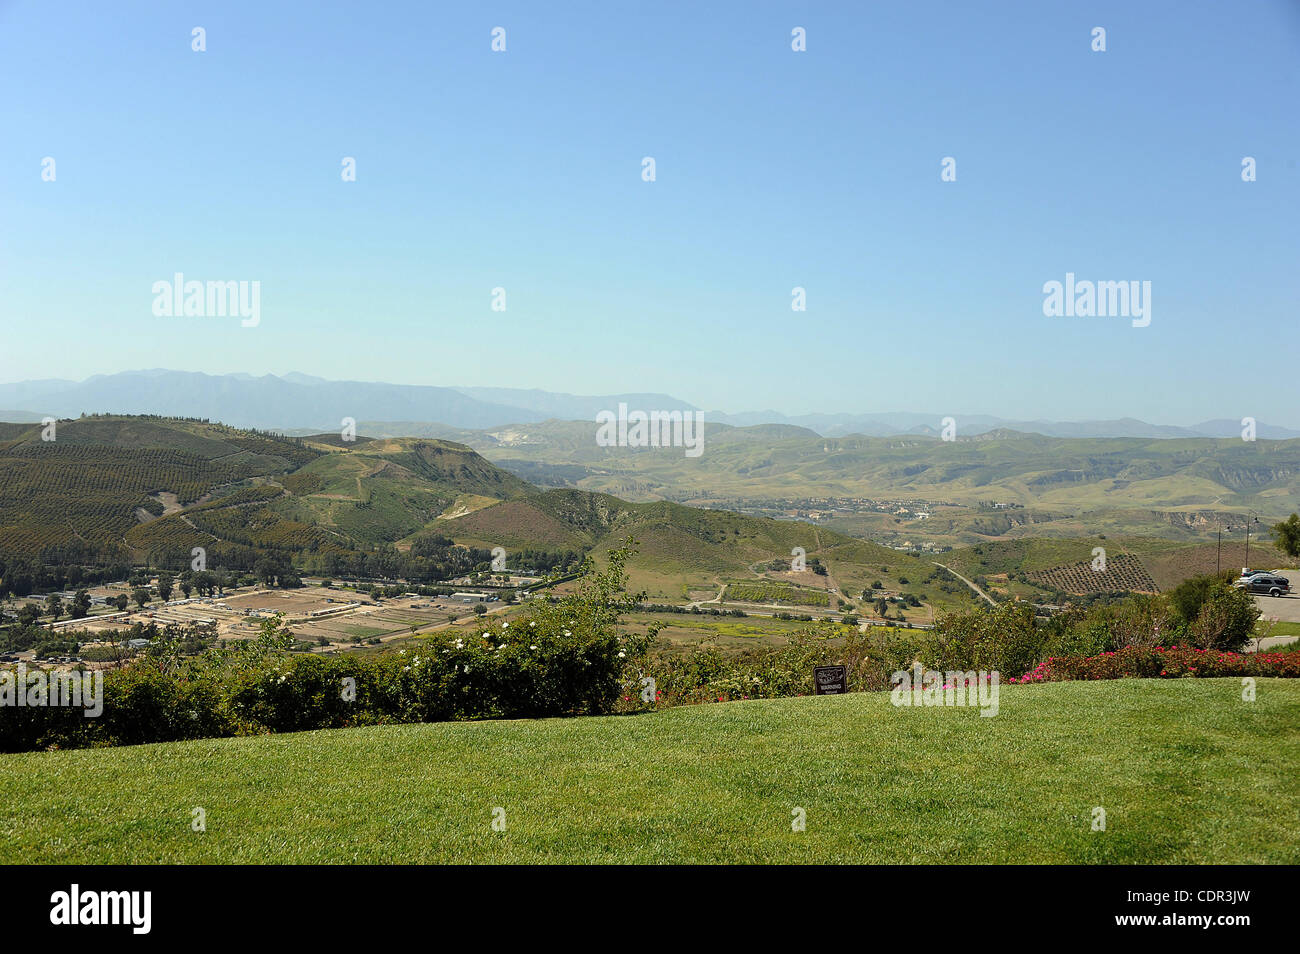 Apr 29, 2011 - Simi Valley, California; USA - A view of Simi Valley at the Ronald Reagan Presidential Library and Museum located in Simi Valley.  Copyright 2011 Jason Moore. (Credit Image: © Jason Moore/ZUMAPRESS.com) Stock Photo